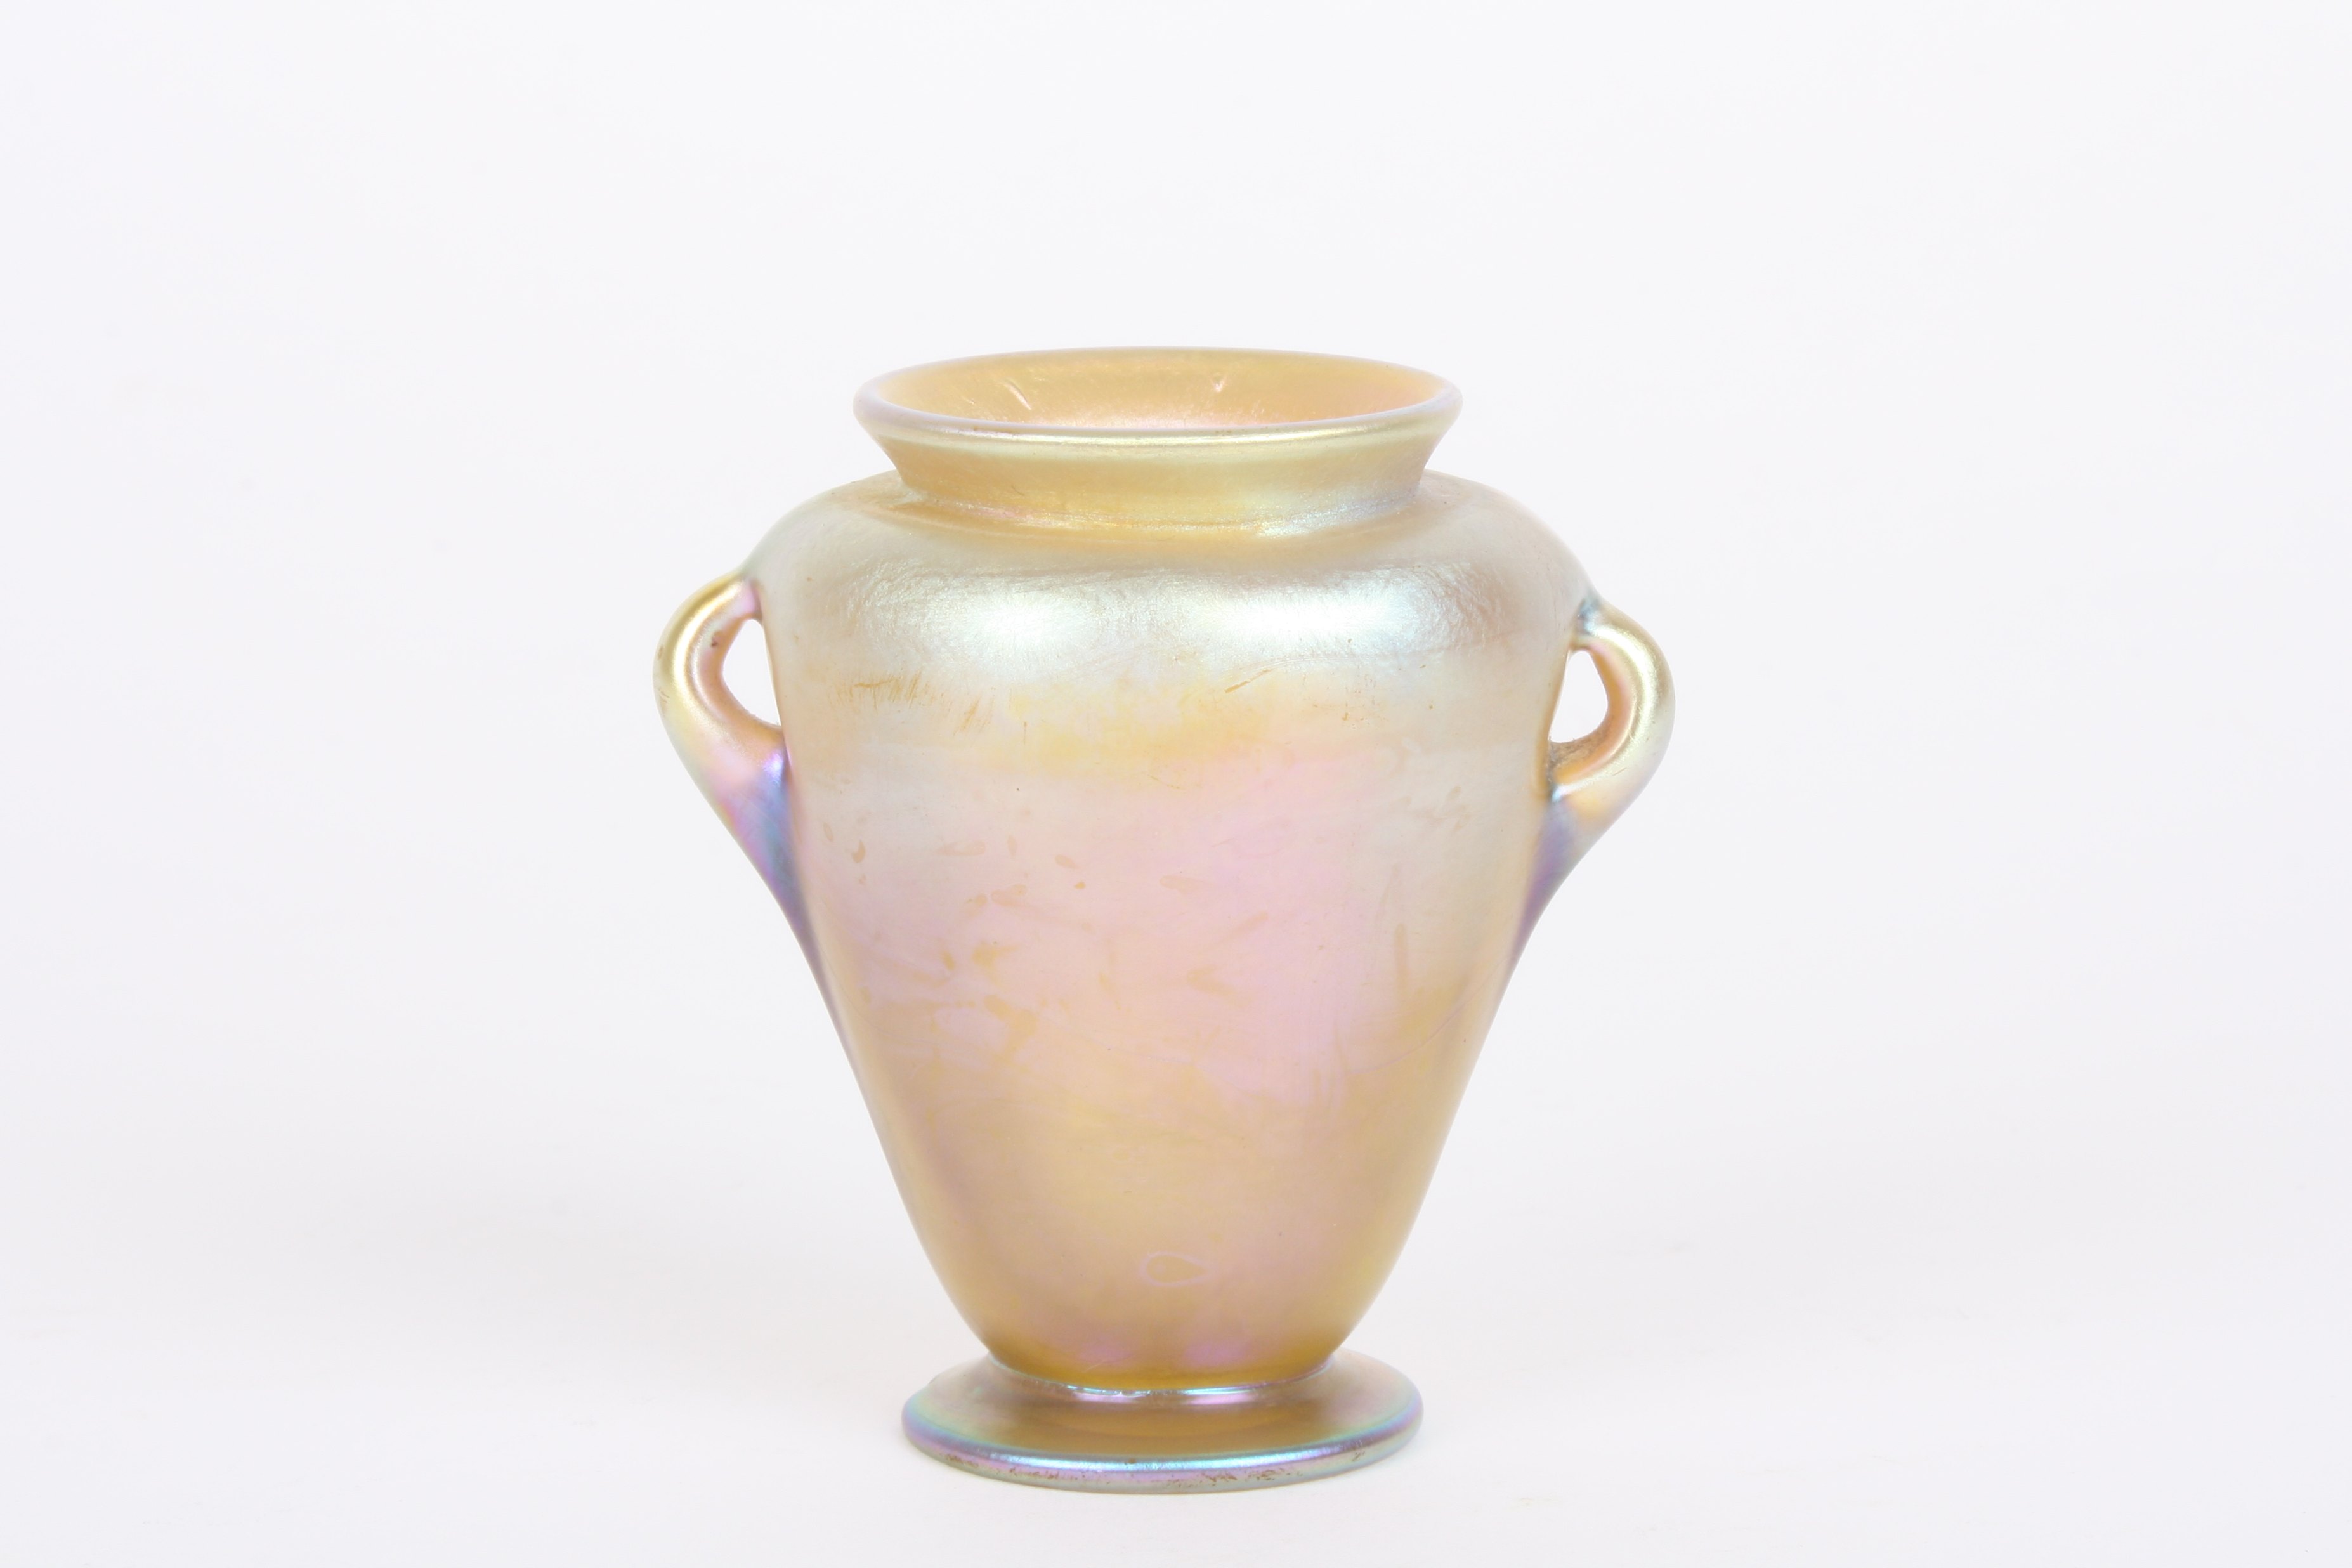 A Louis Comfort Tiffany Favrile iridescent glass vase
of urn shaped form with small loop handles,